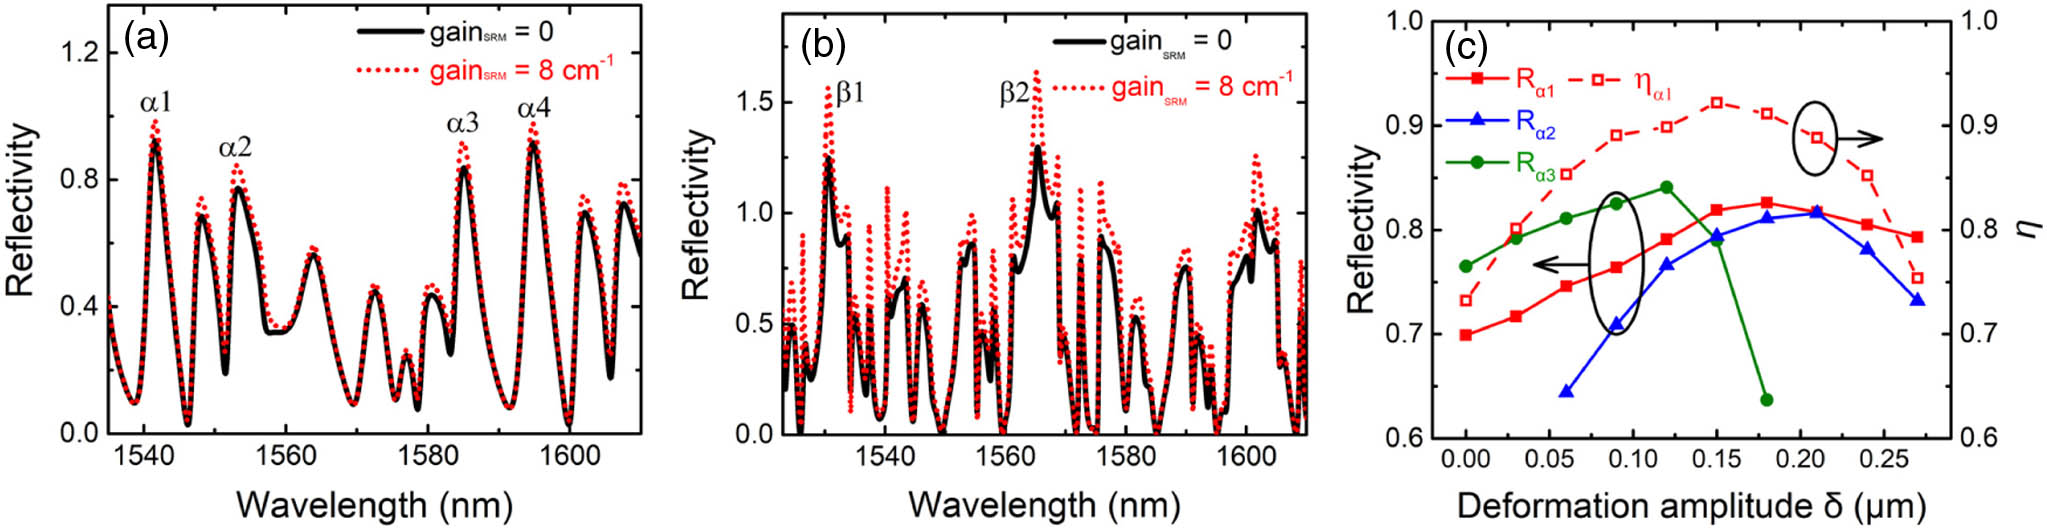 Simulated reflectivity spectra at different gain levels obtained by FDTD simulation for an SRM connected to a vertex waveguide, with (a) the side length a=10 μm, the deformation amplitude δ=0.15 μm, and waveguide width d=2 μm and (b) a=15 μm, δ=0.25 μm, and d=2 μm, respectively. (c) Reflectivity for the modes α1, α2, α3, and η for the mode α1 versus the deformation amplitude δ for an HSRRL with a=10 μm, d=2 μm, and L=300 μm.